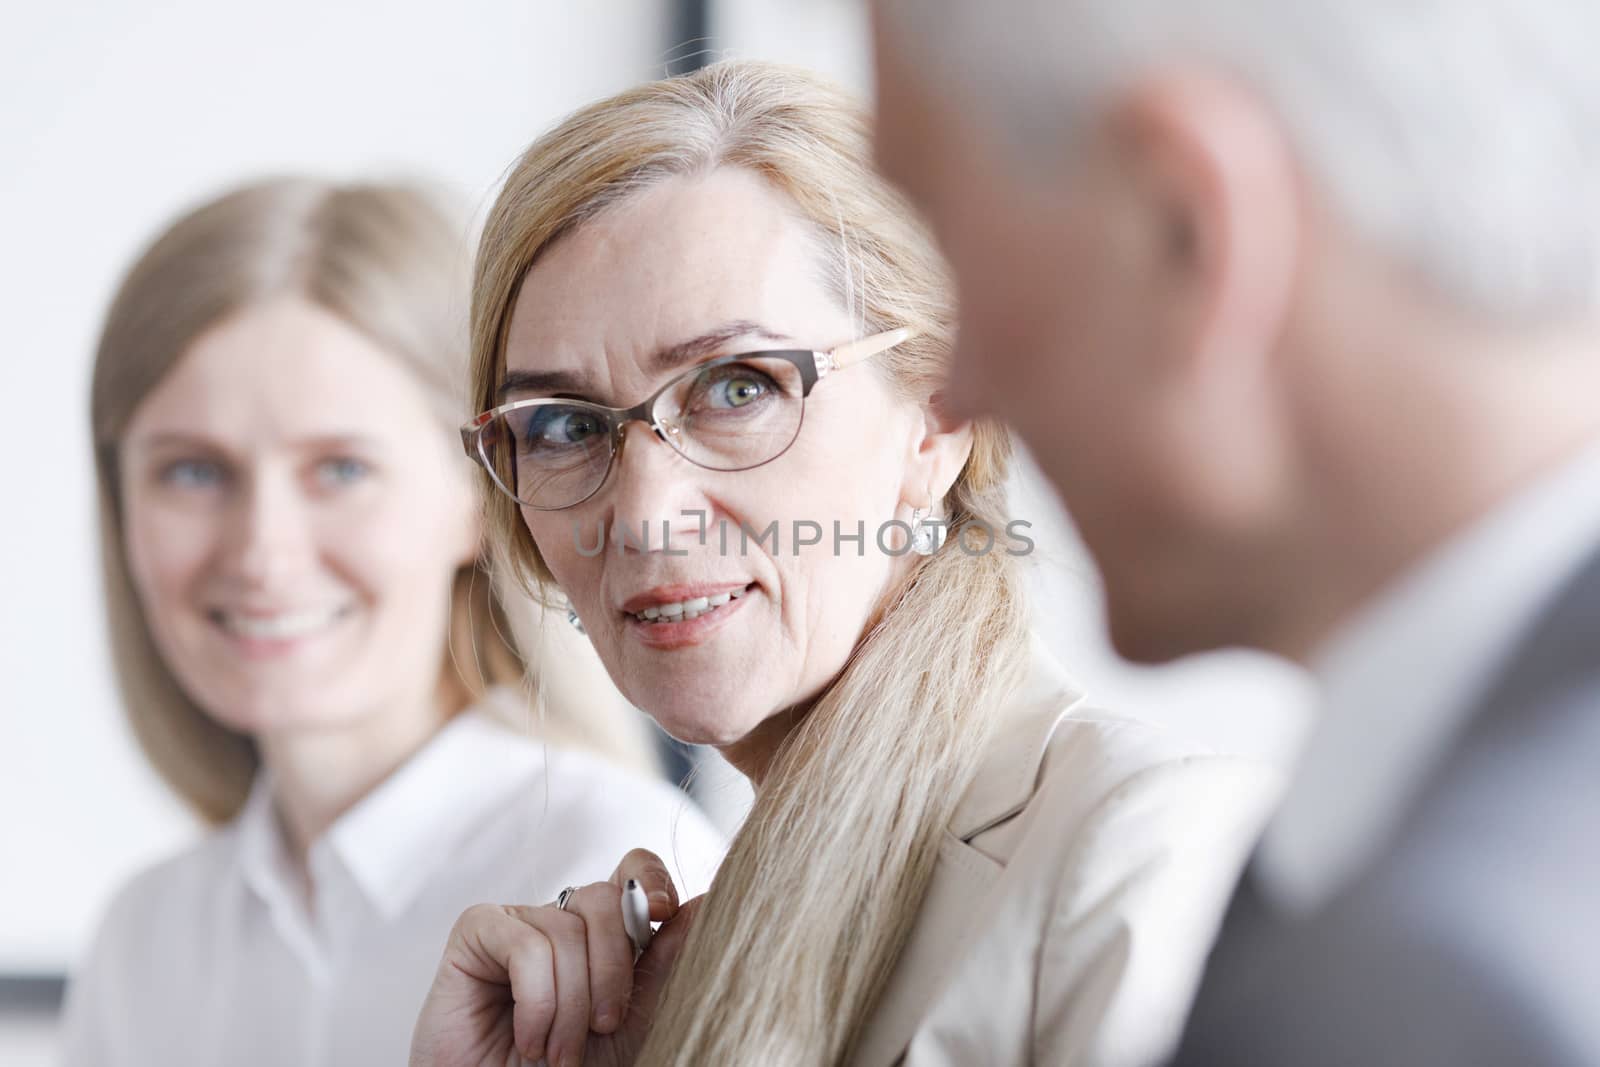 Business people sitting in a row and working, focus on mature woman in glasses